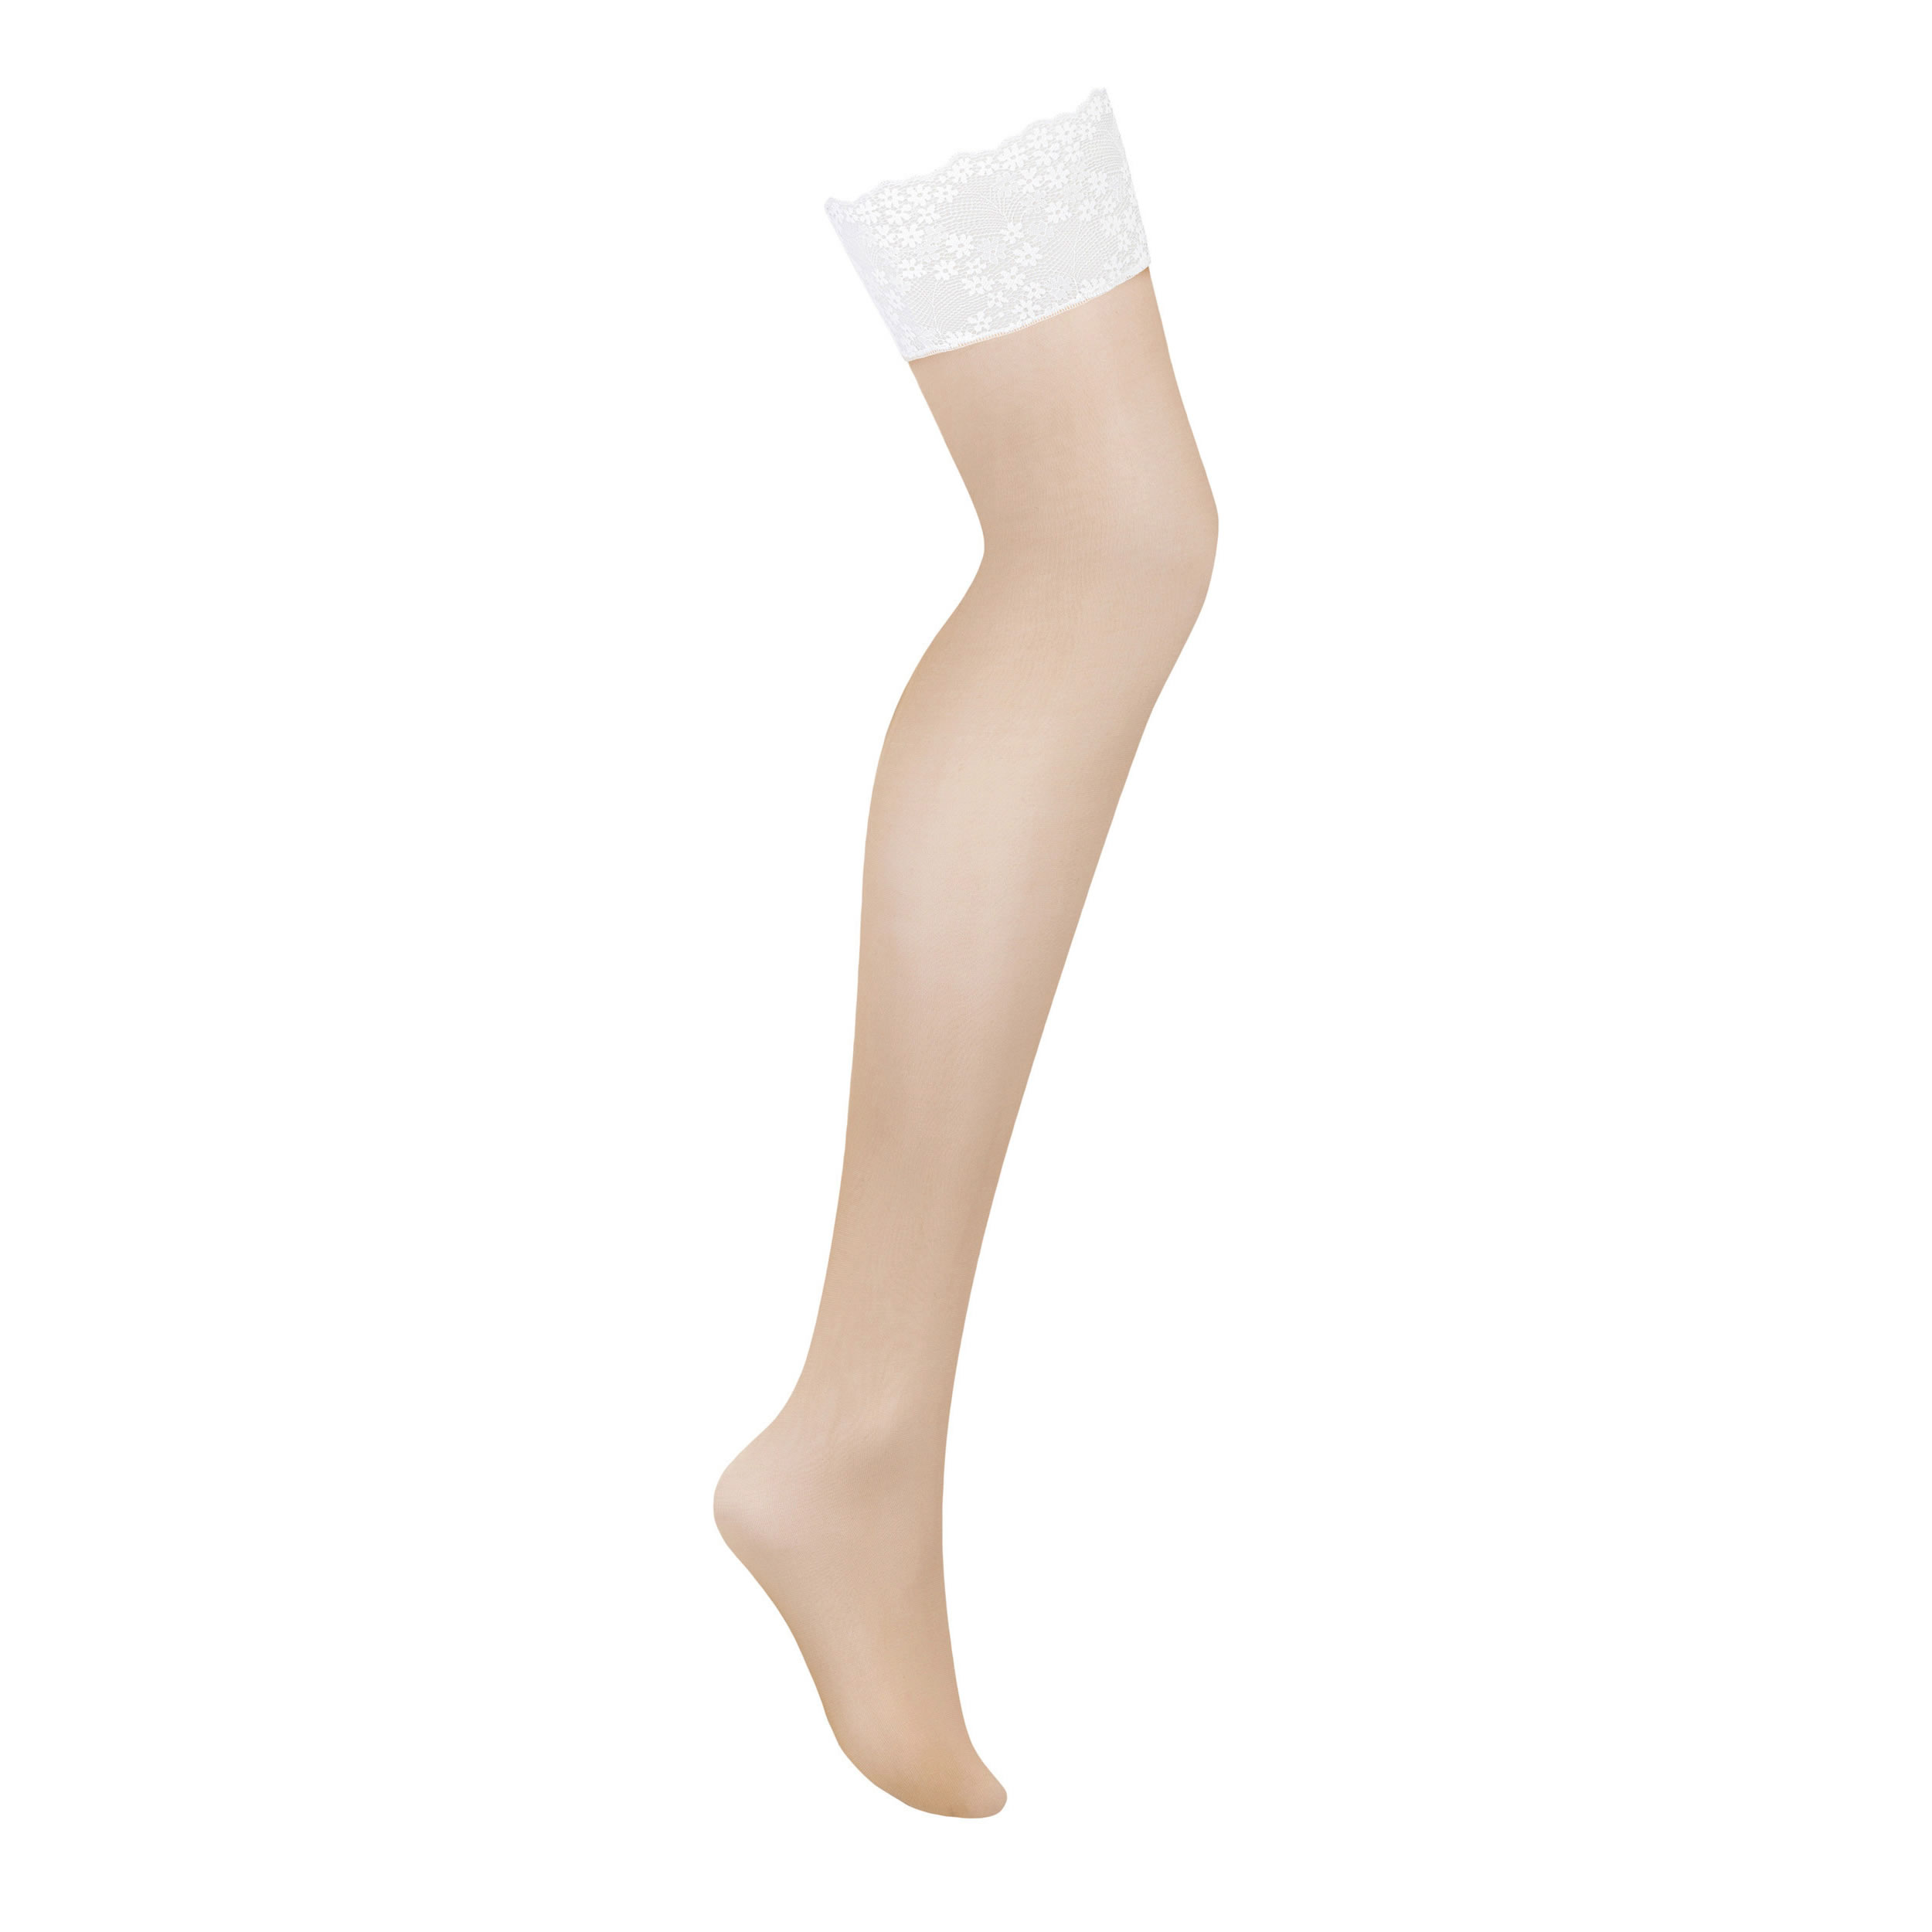 Obsessive Heavenlly Stay-up Stockings in Nude with White Lace